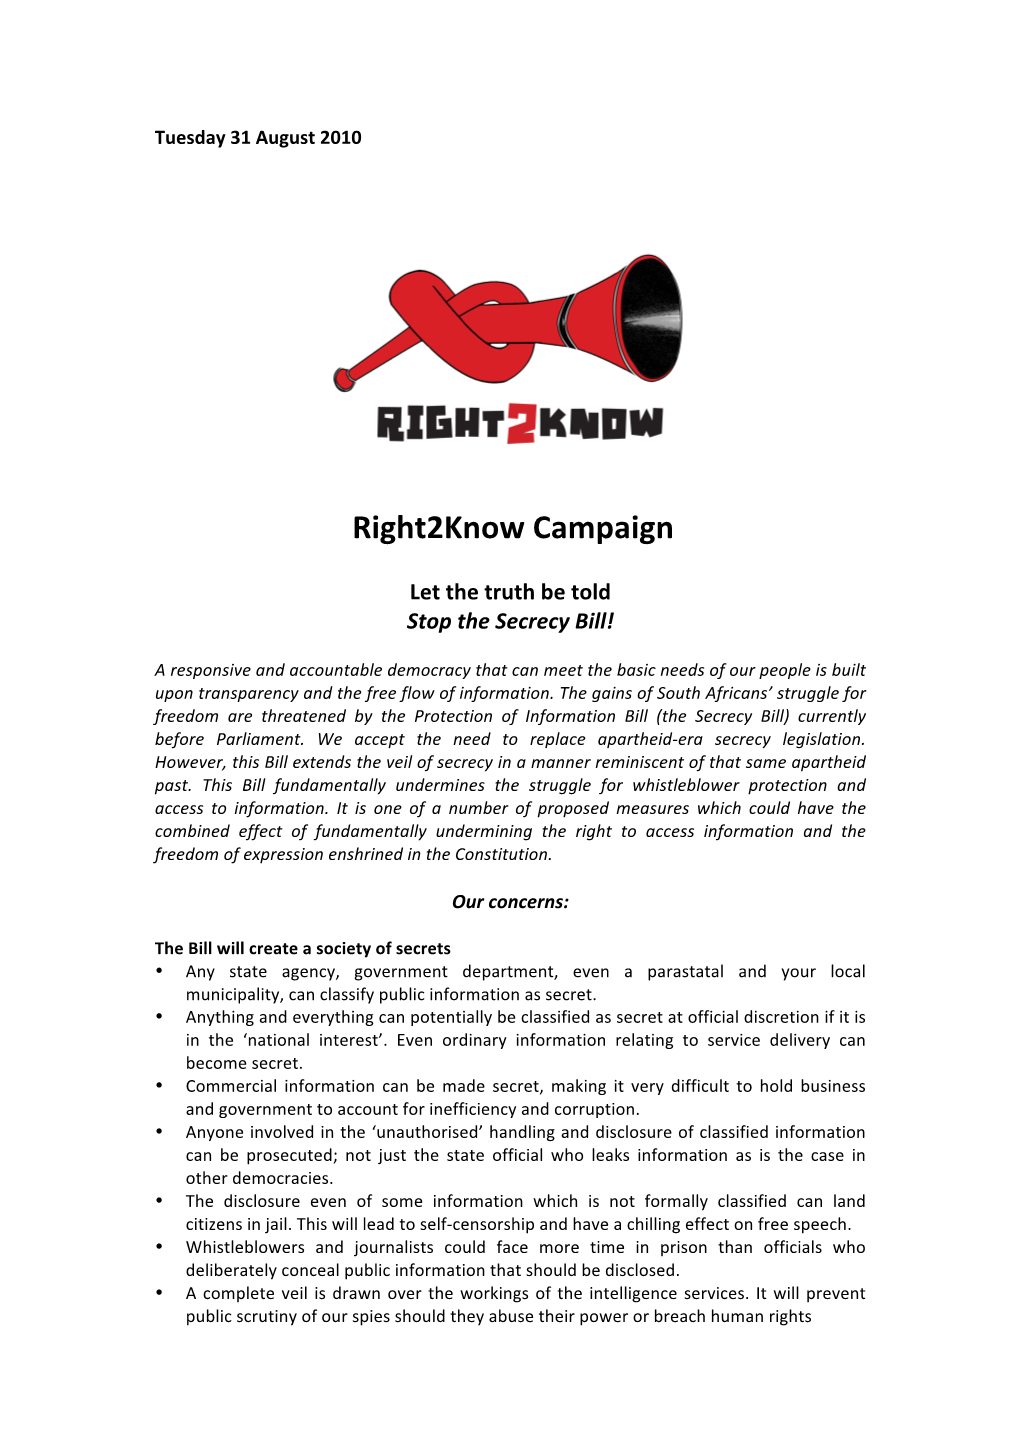 Right2know Campaign